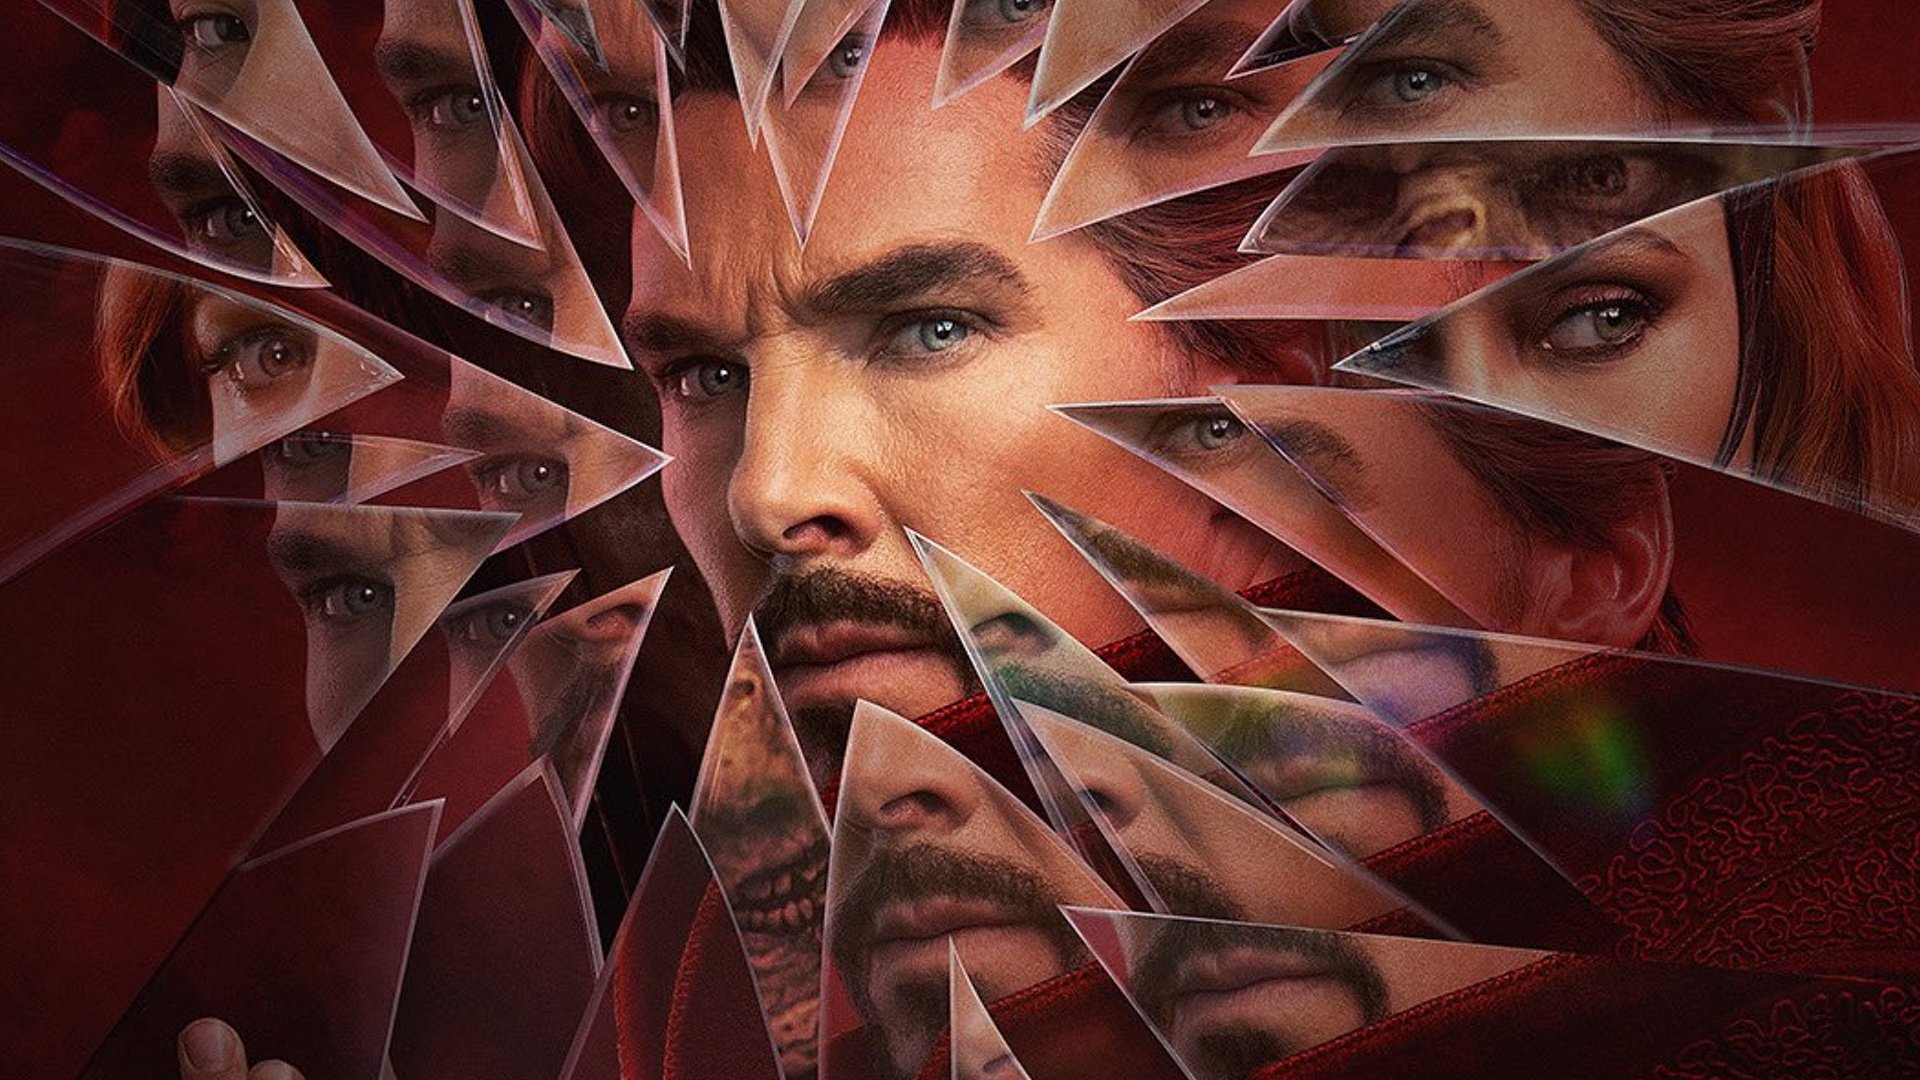 Cool TV Spot for DOCTOR STRANGE 2 with New Footage and an IMAX Poster -  